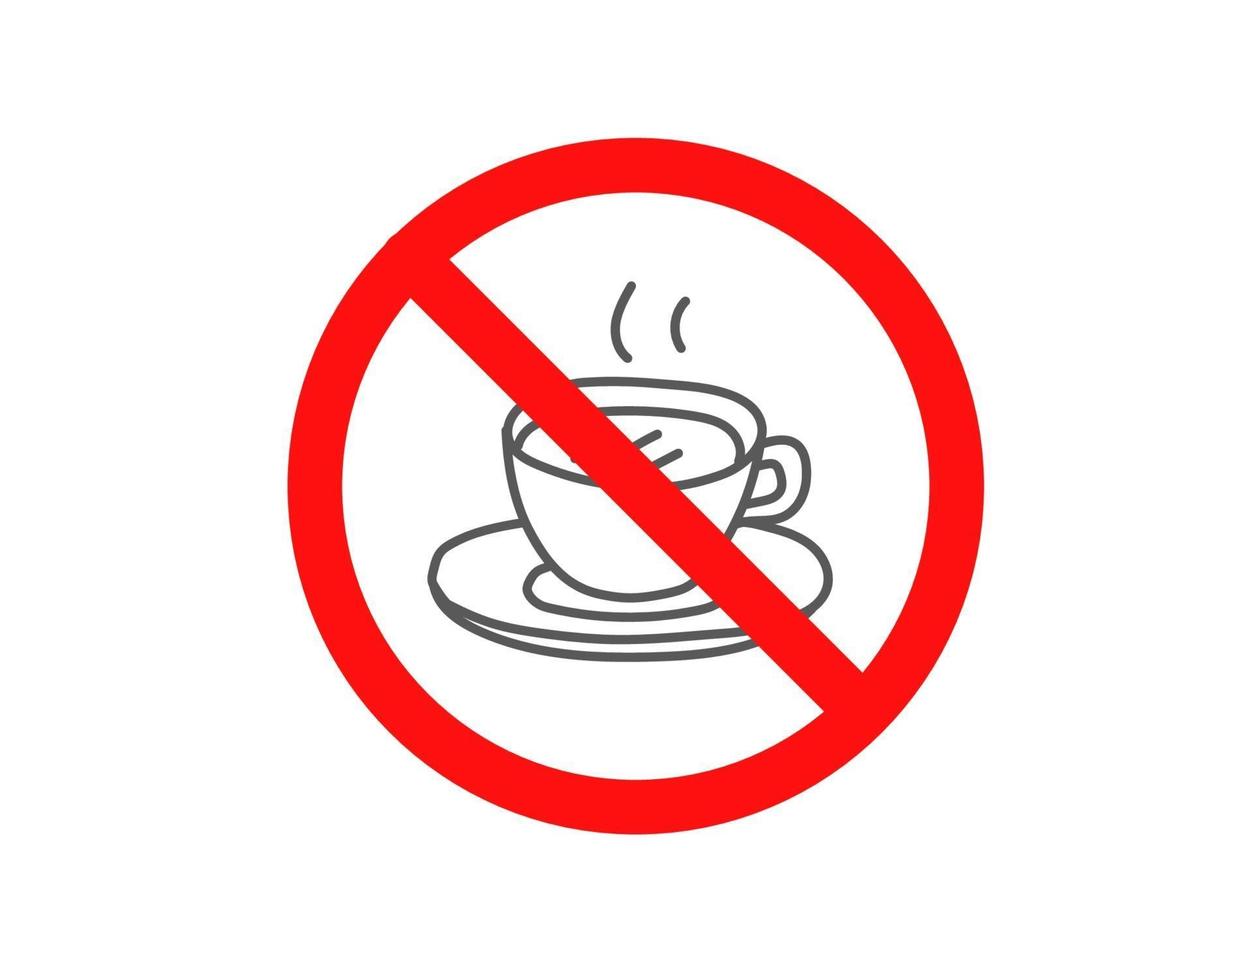 Do use hot drinks. Vector sign isolated on white